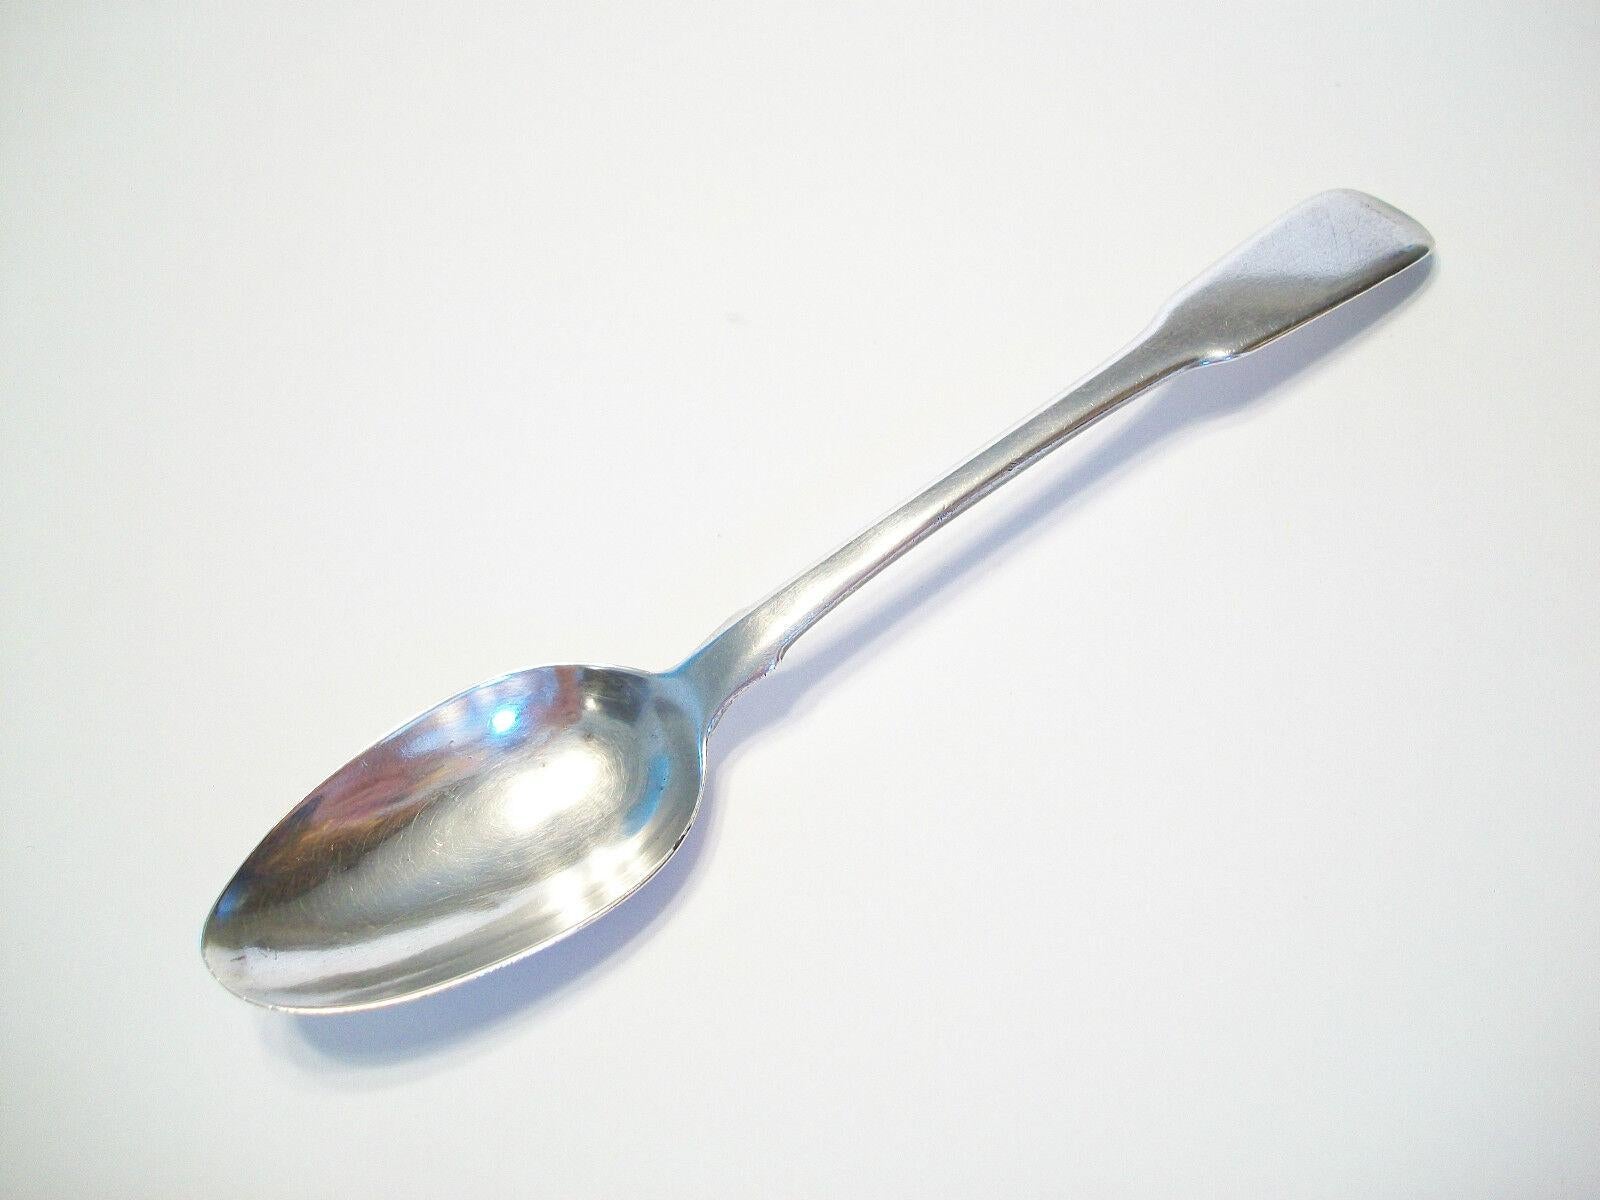 WILLIAM ELEY  WILLIAM FEARN  WILLIAM CHAWNER - George III sterling silver tea or dessert spoon - hallmarked - United Kingdom (London) - circa 1813.

Excellent antique condition - no loss - no damage - no repairs - tarnishing & fine surface scratches